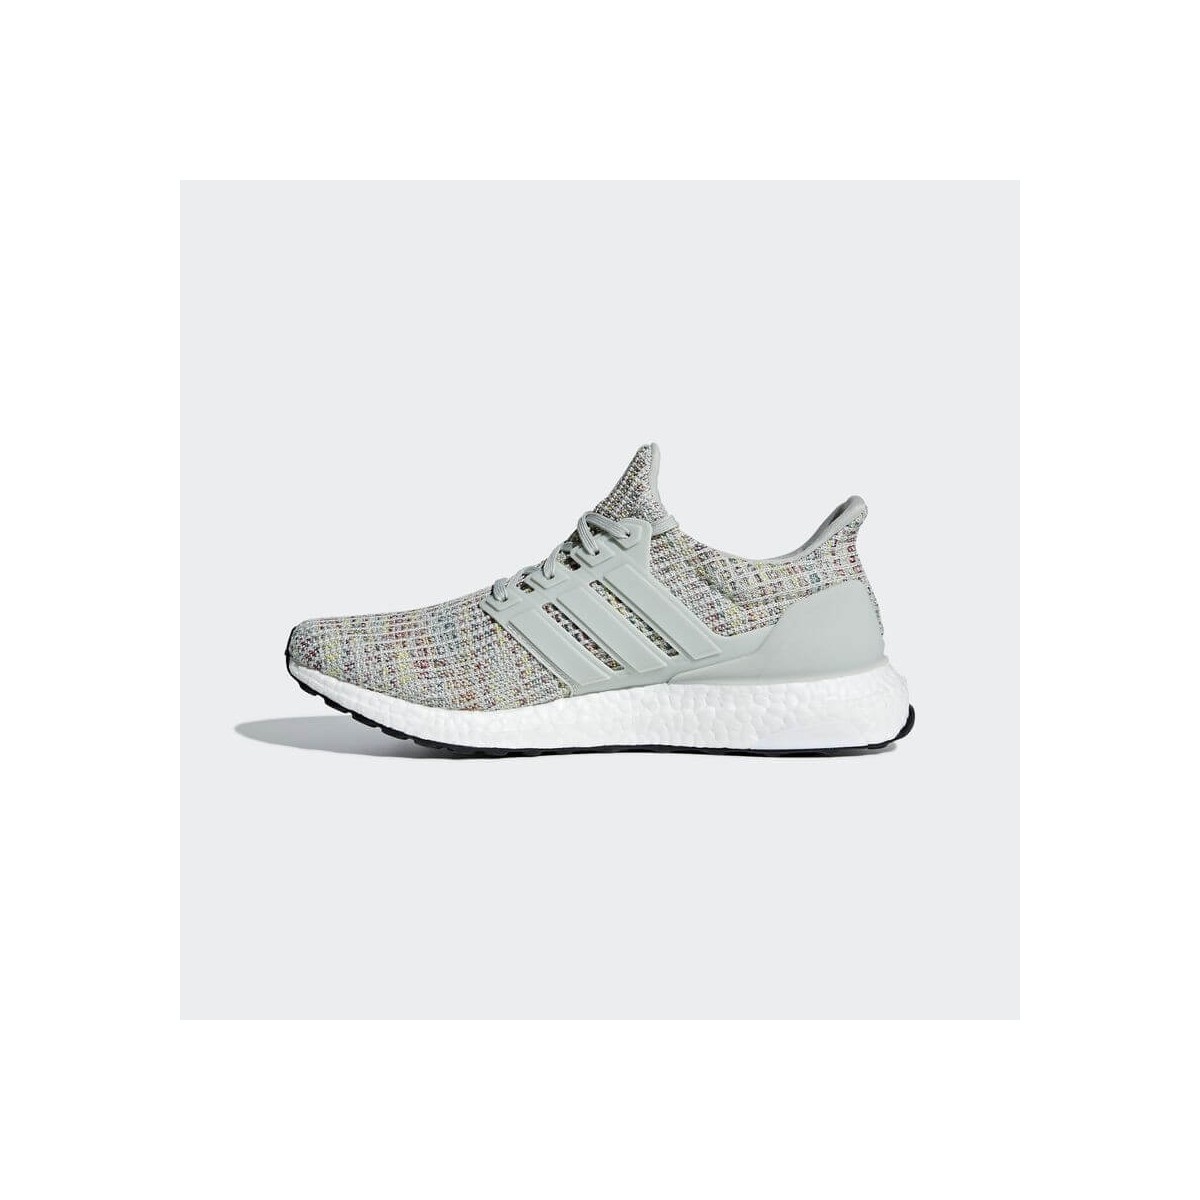 Adidas Ultra Boost Beige Carbon FW18 Man Running shoes